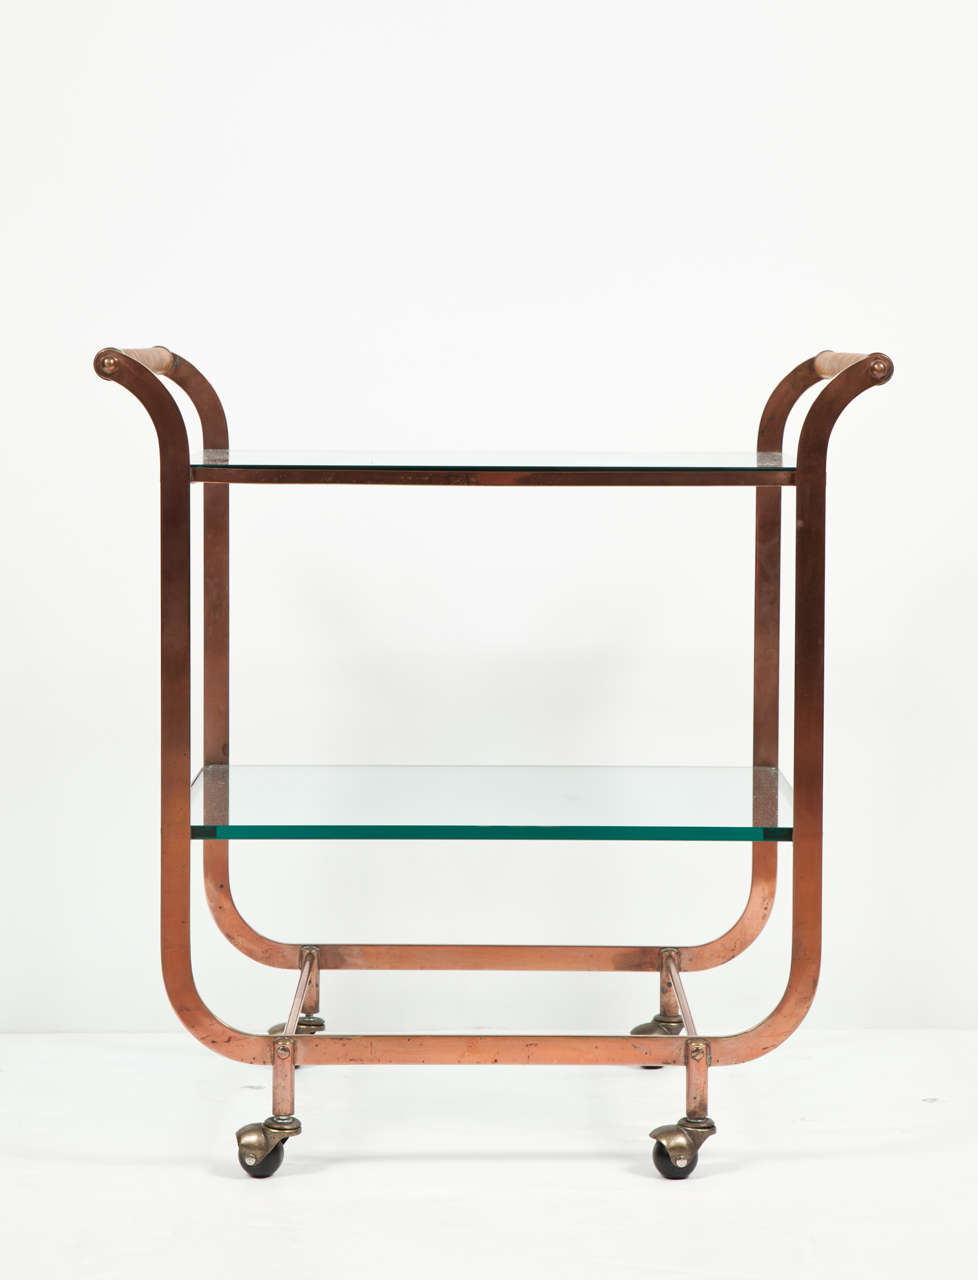 Exceptional Art Deco copper framed bar cart with two glass shelves, rattan wrapped handles and brass casters.
Saturday Sale item, reduced from 3600. No further discount.